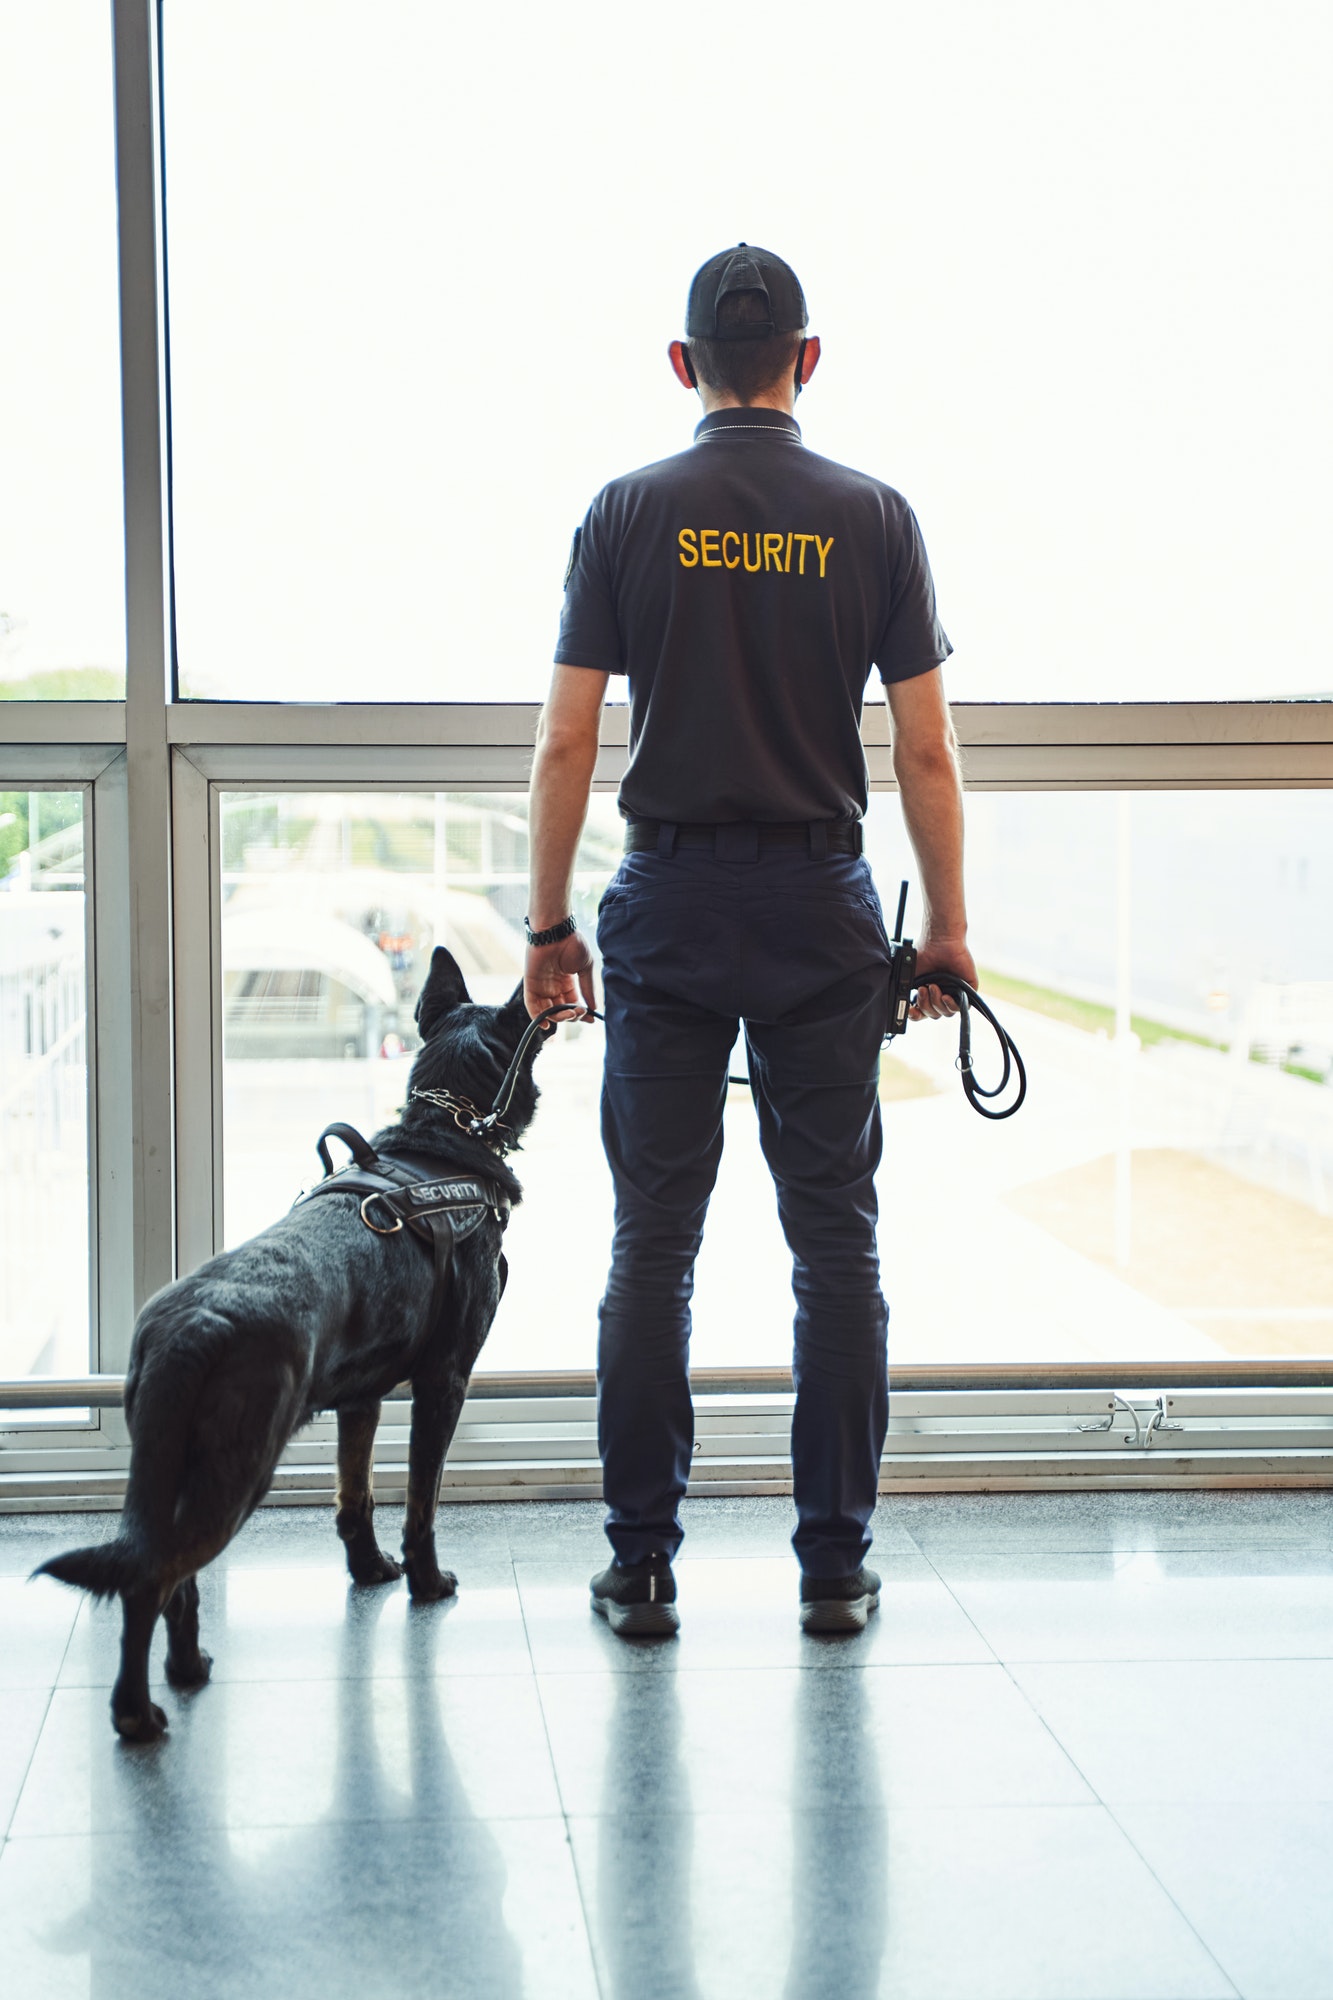 security-worker-with-detection-dog-standing-at-airport-terminal.jpg